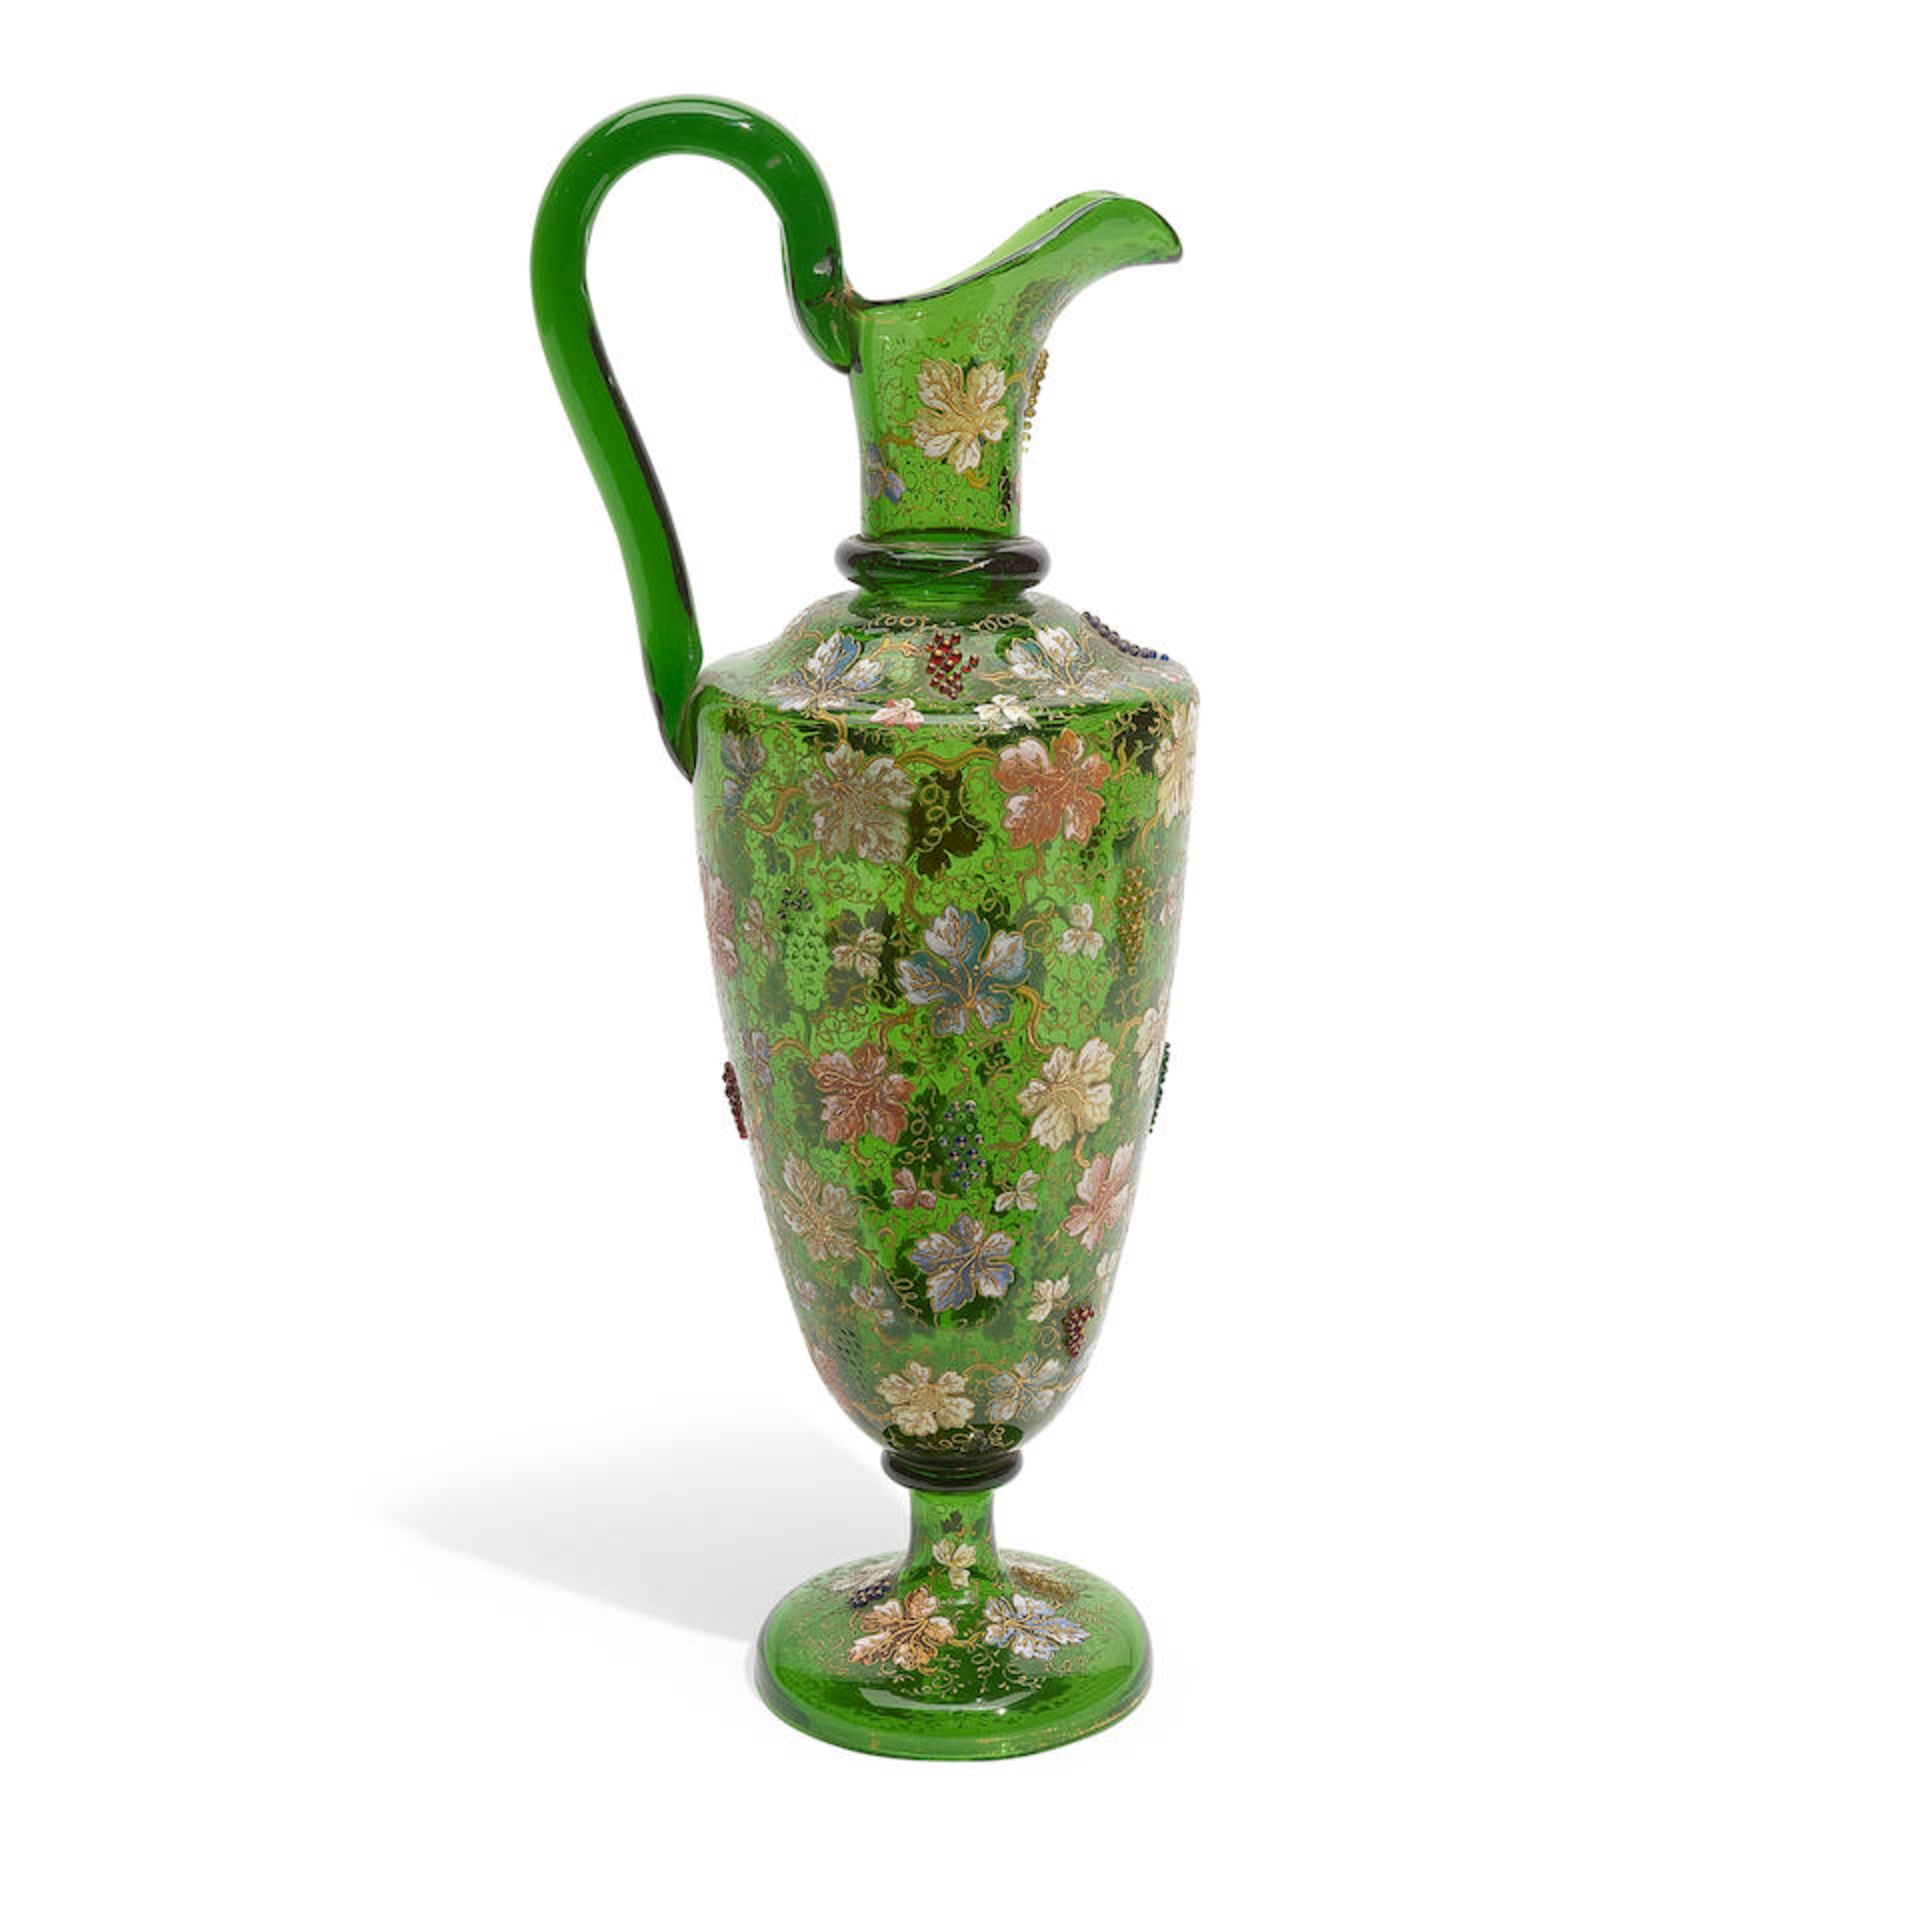 A MOSER GILT AND ENAMELLED GREEN GLASS EWERLate 19th century